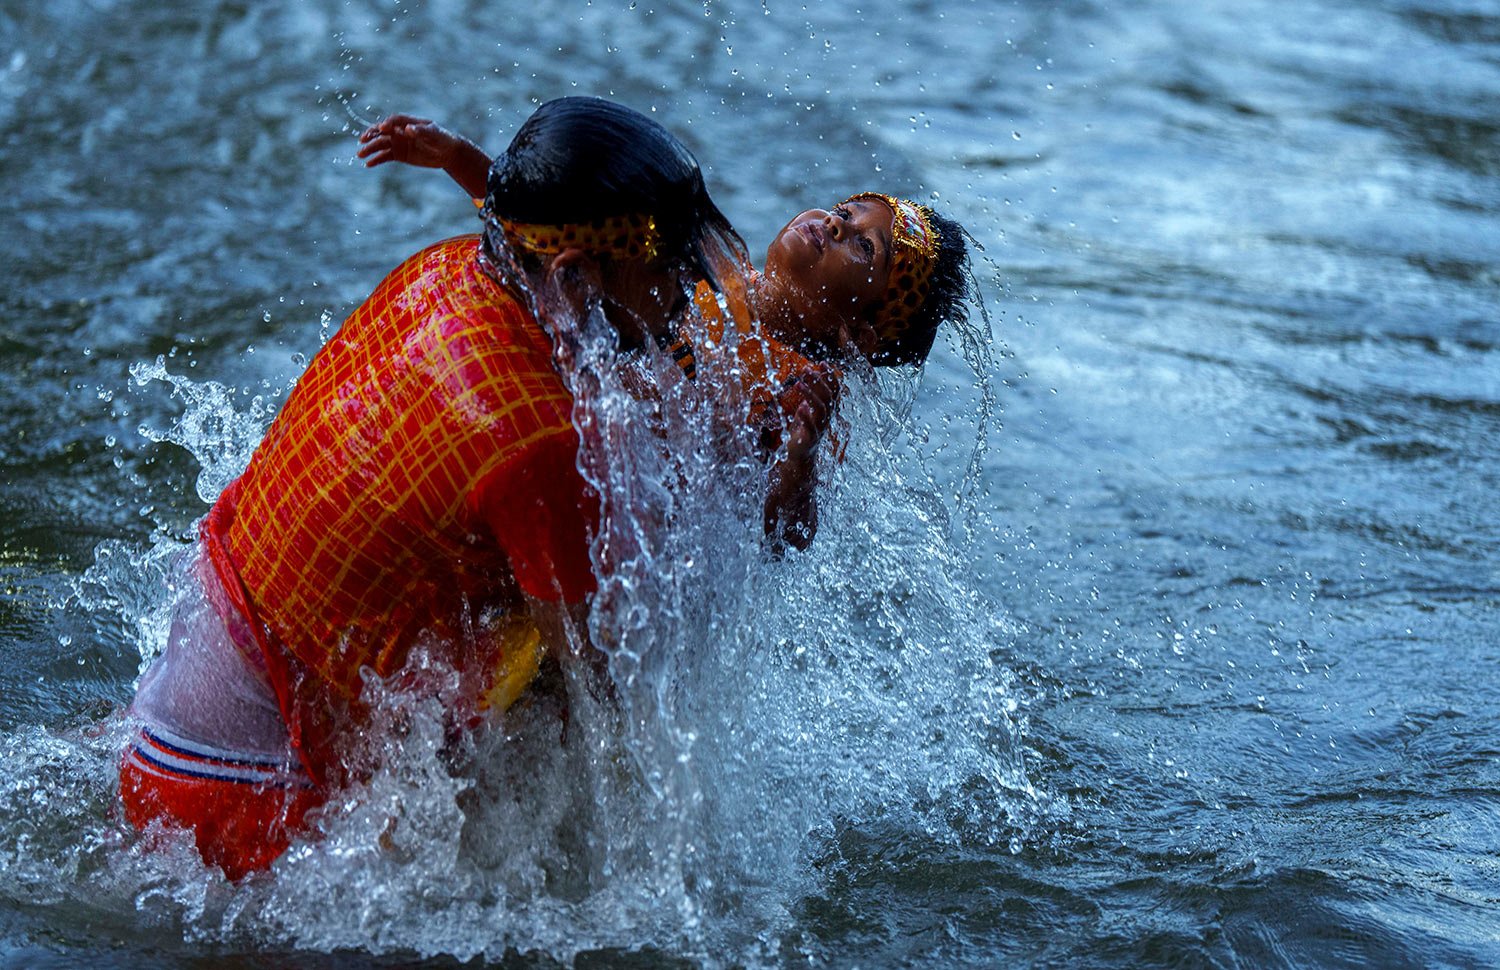  A Hindu devotee takes a holy dip with his child before collecting water from the Bagmati river during  the Bol Bom pilgrimage at Sudarijaal, on the outskirts of Kathmandu, Nepal, Monday, Aug. 8, 2022.  (AP Photo/Niranjan Shrestha) 